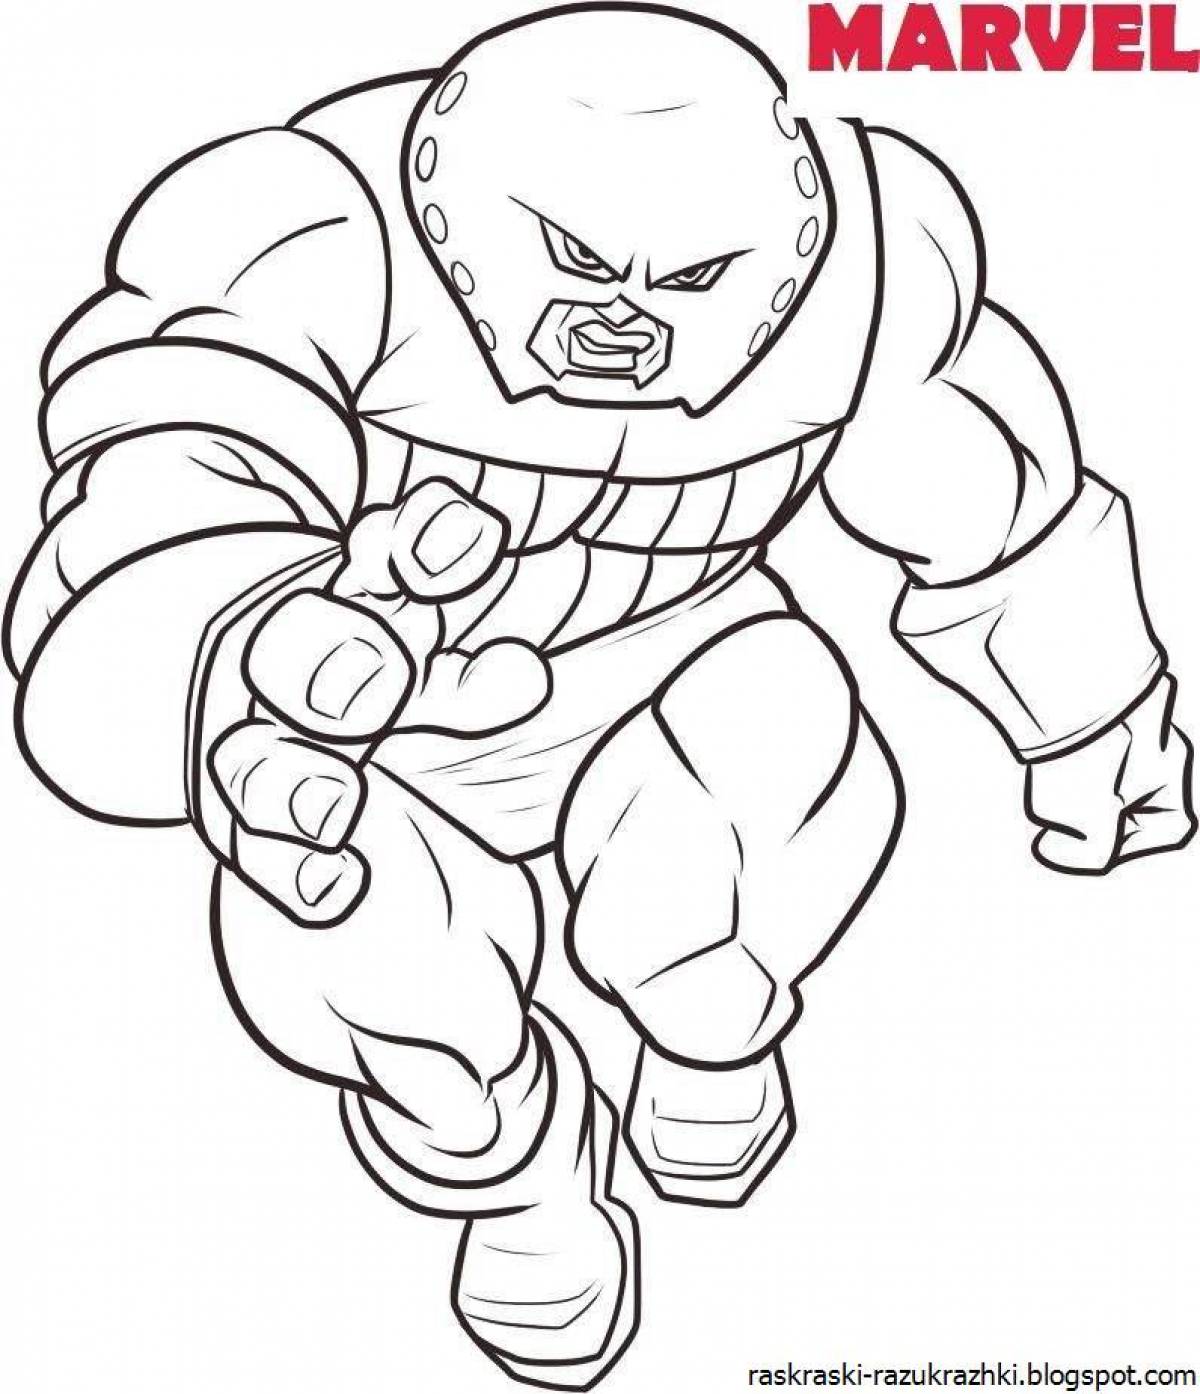 Great marvel heroes coloring book